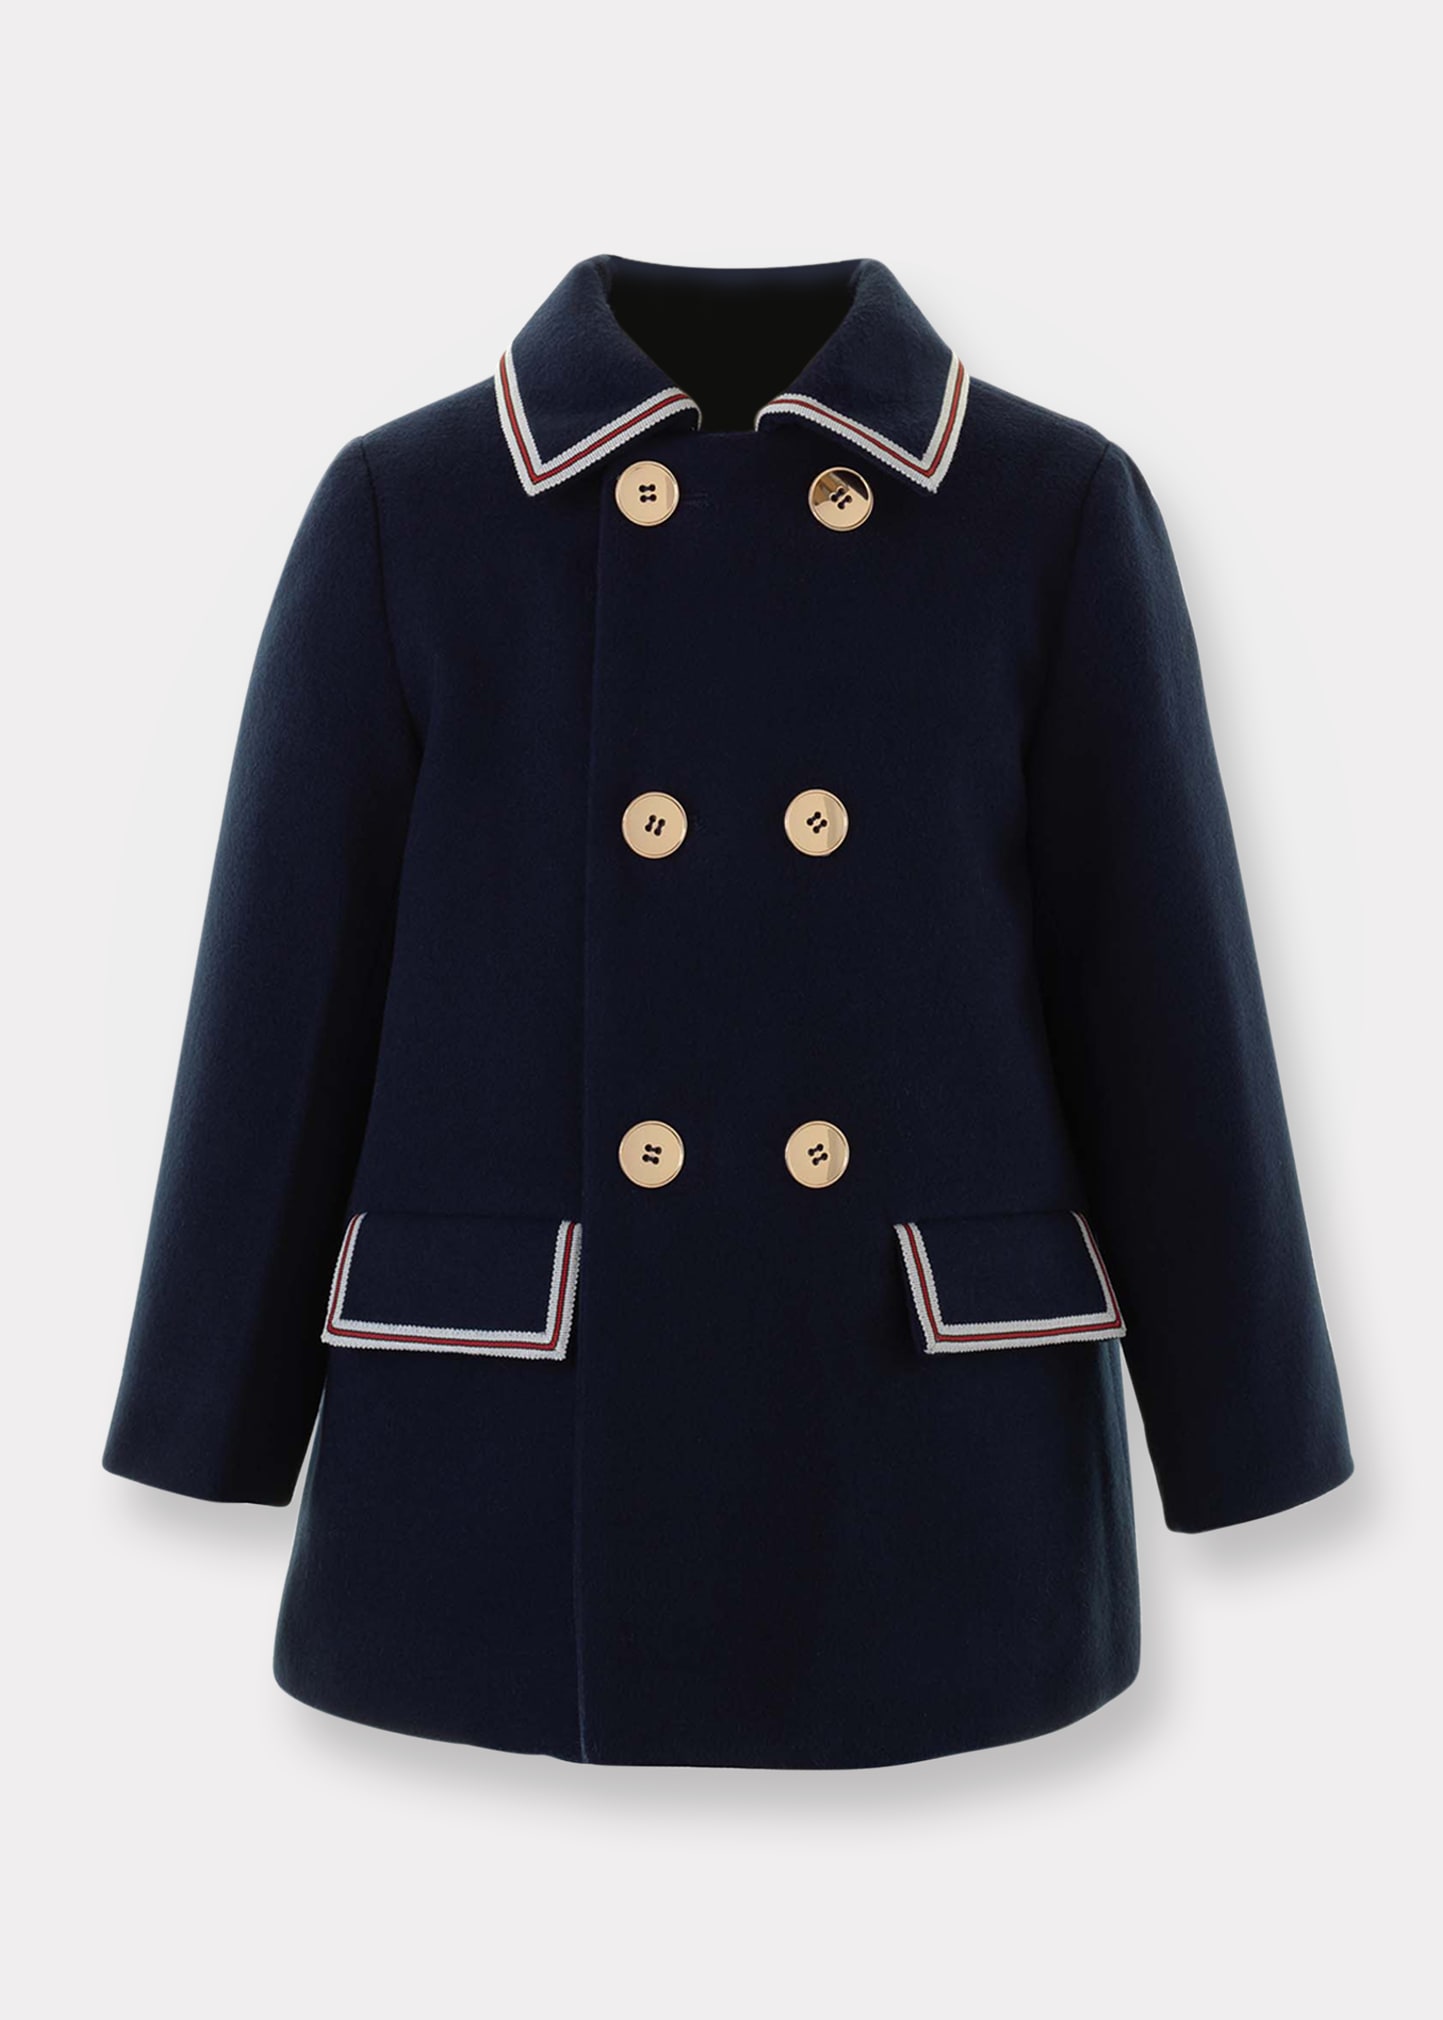 Boy's Double Breasted Coat, Size 2-10